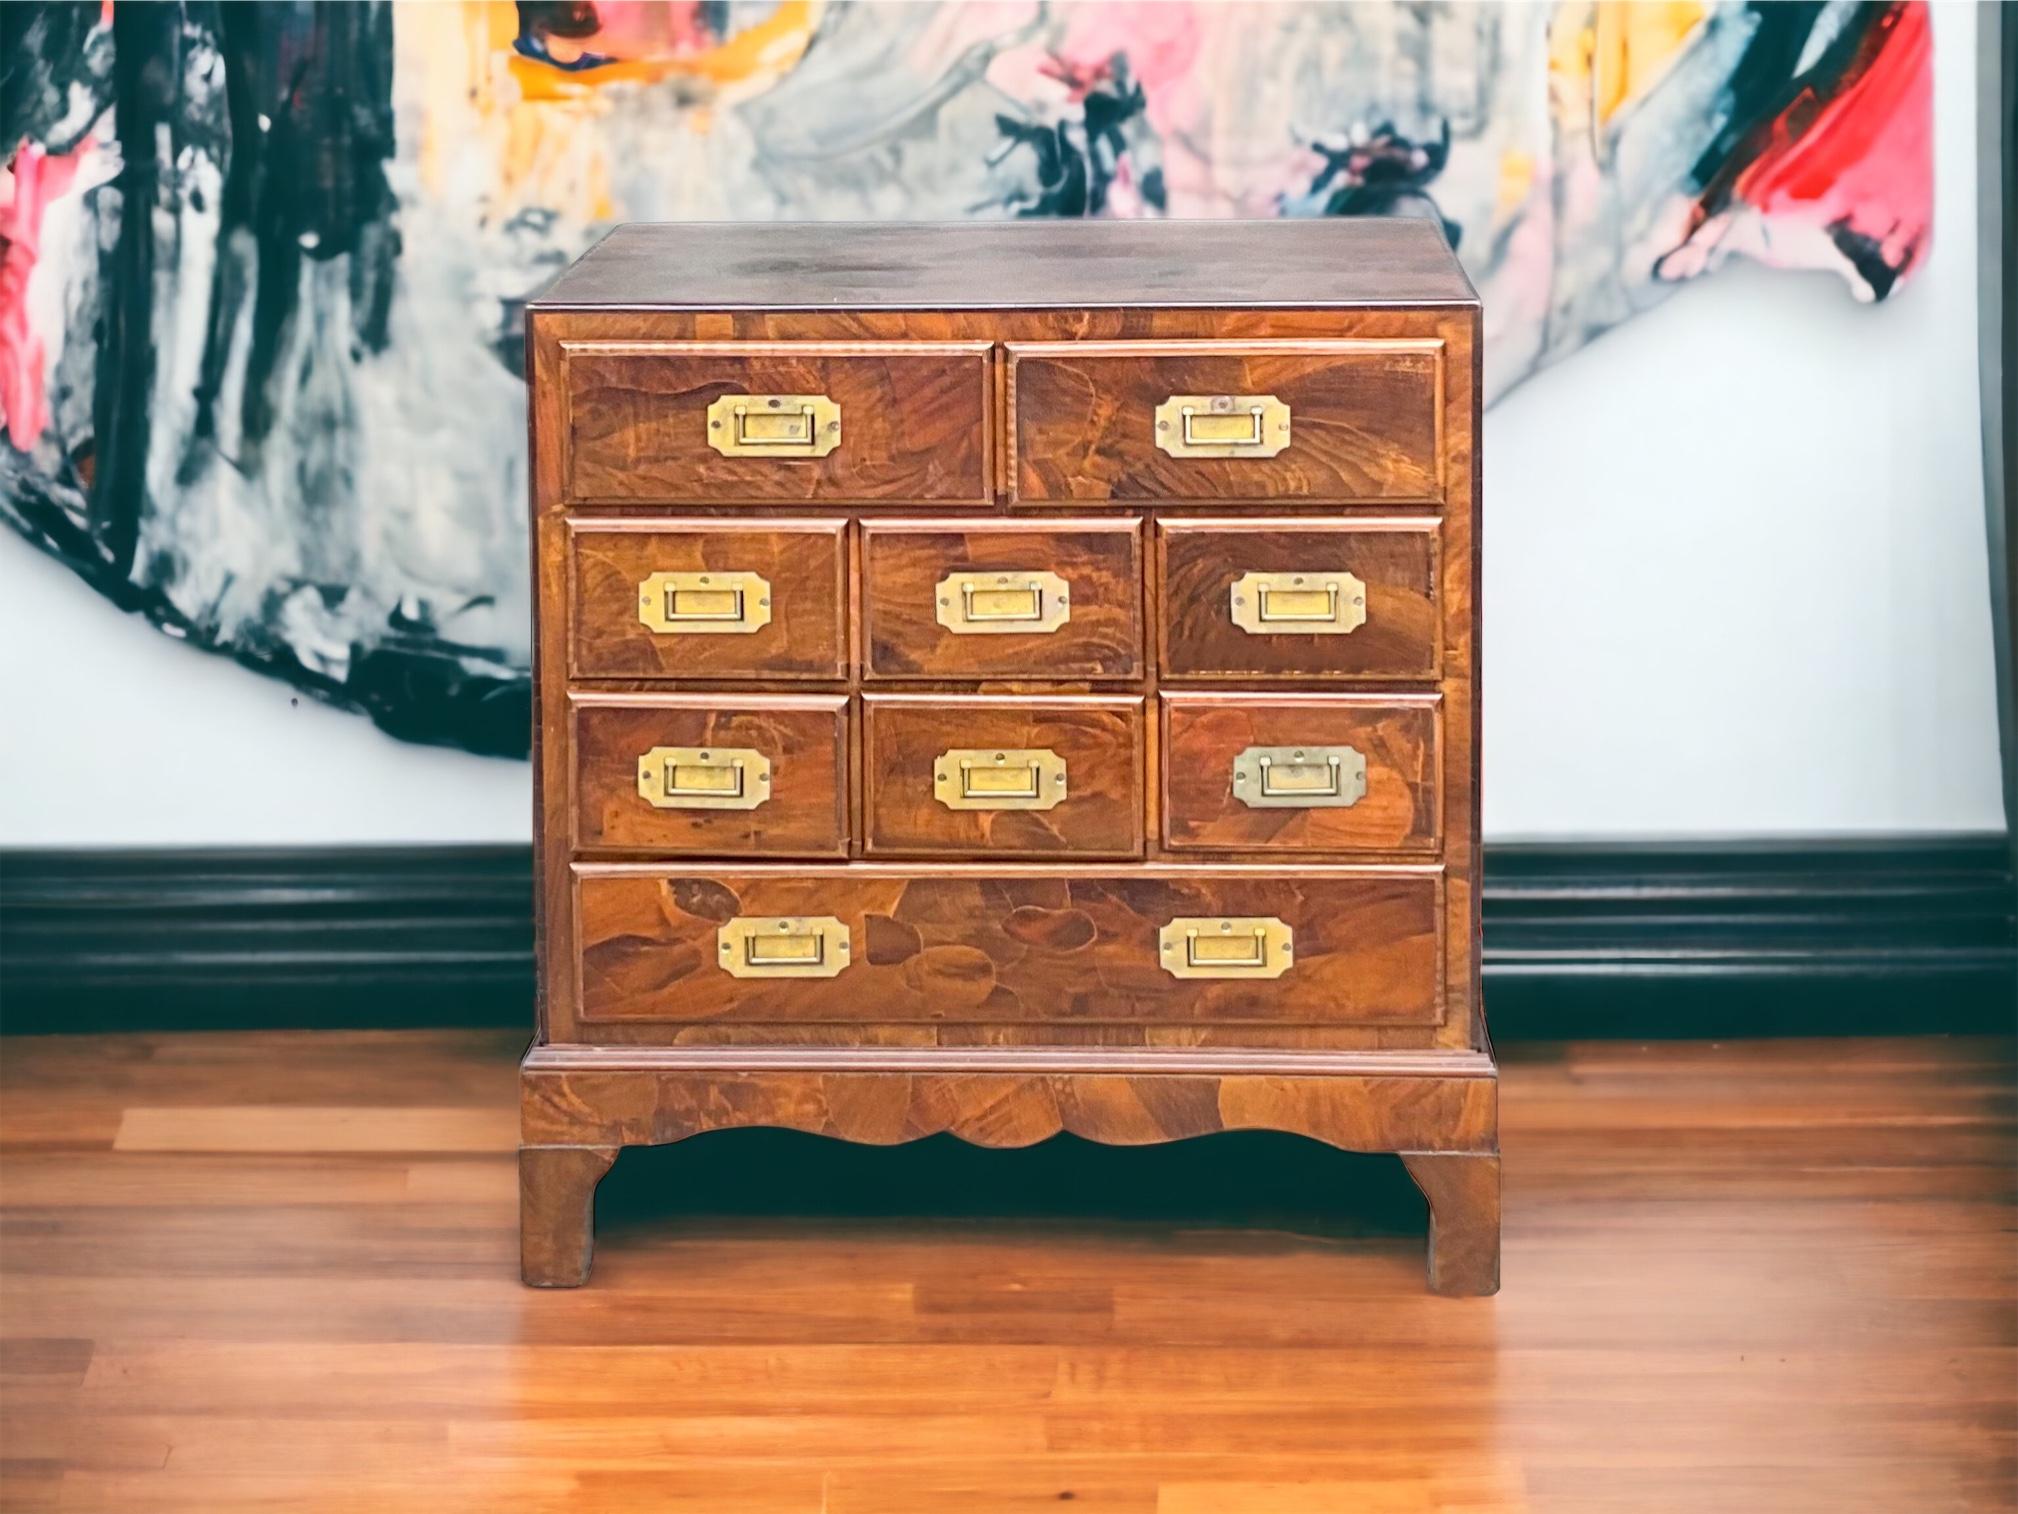 This is an Italian patchwork burl petite chest or commode or even a side table with campaign styling. The piece is a rich patchwork burl, a particular favorite of mine. It is in very good condition and marked. 